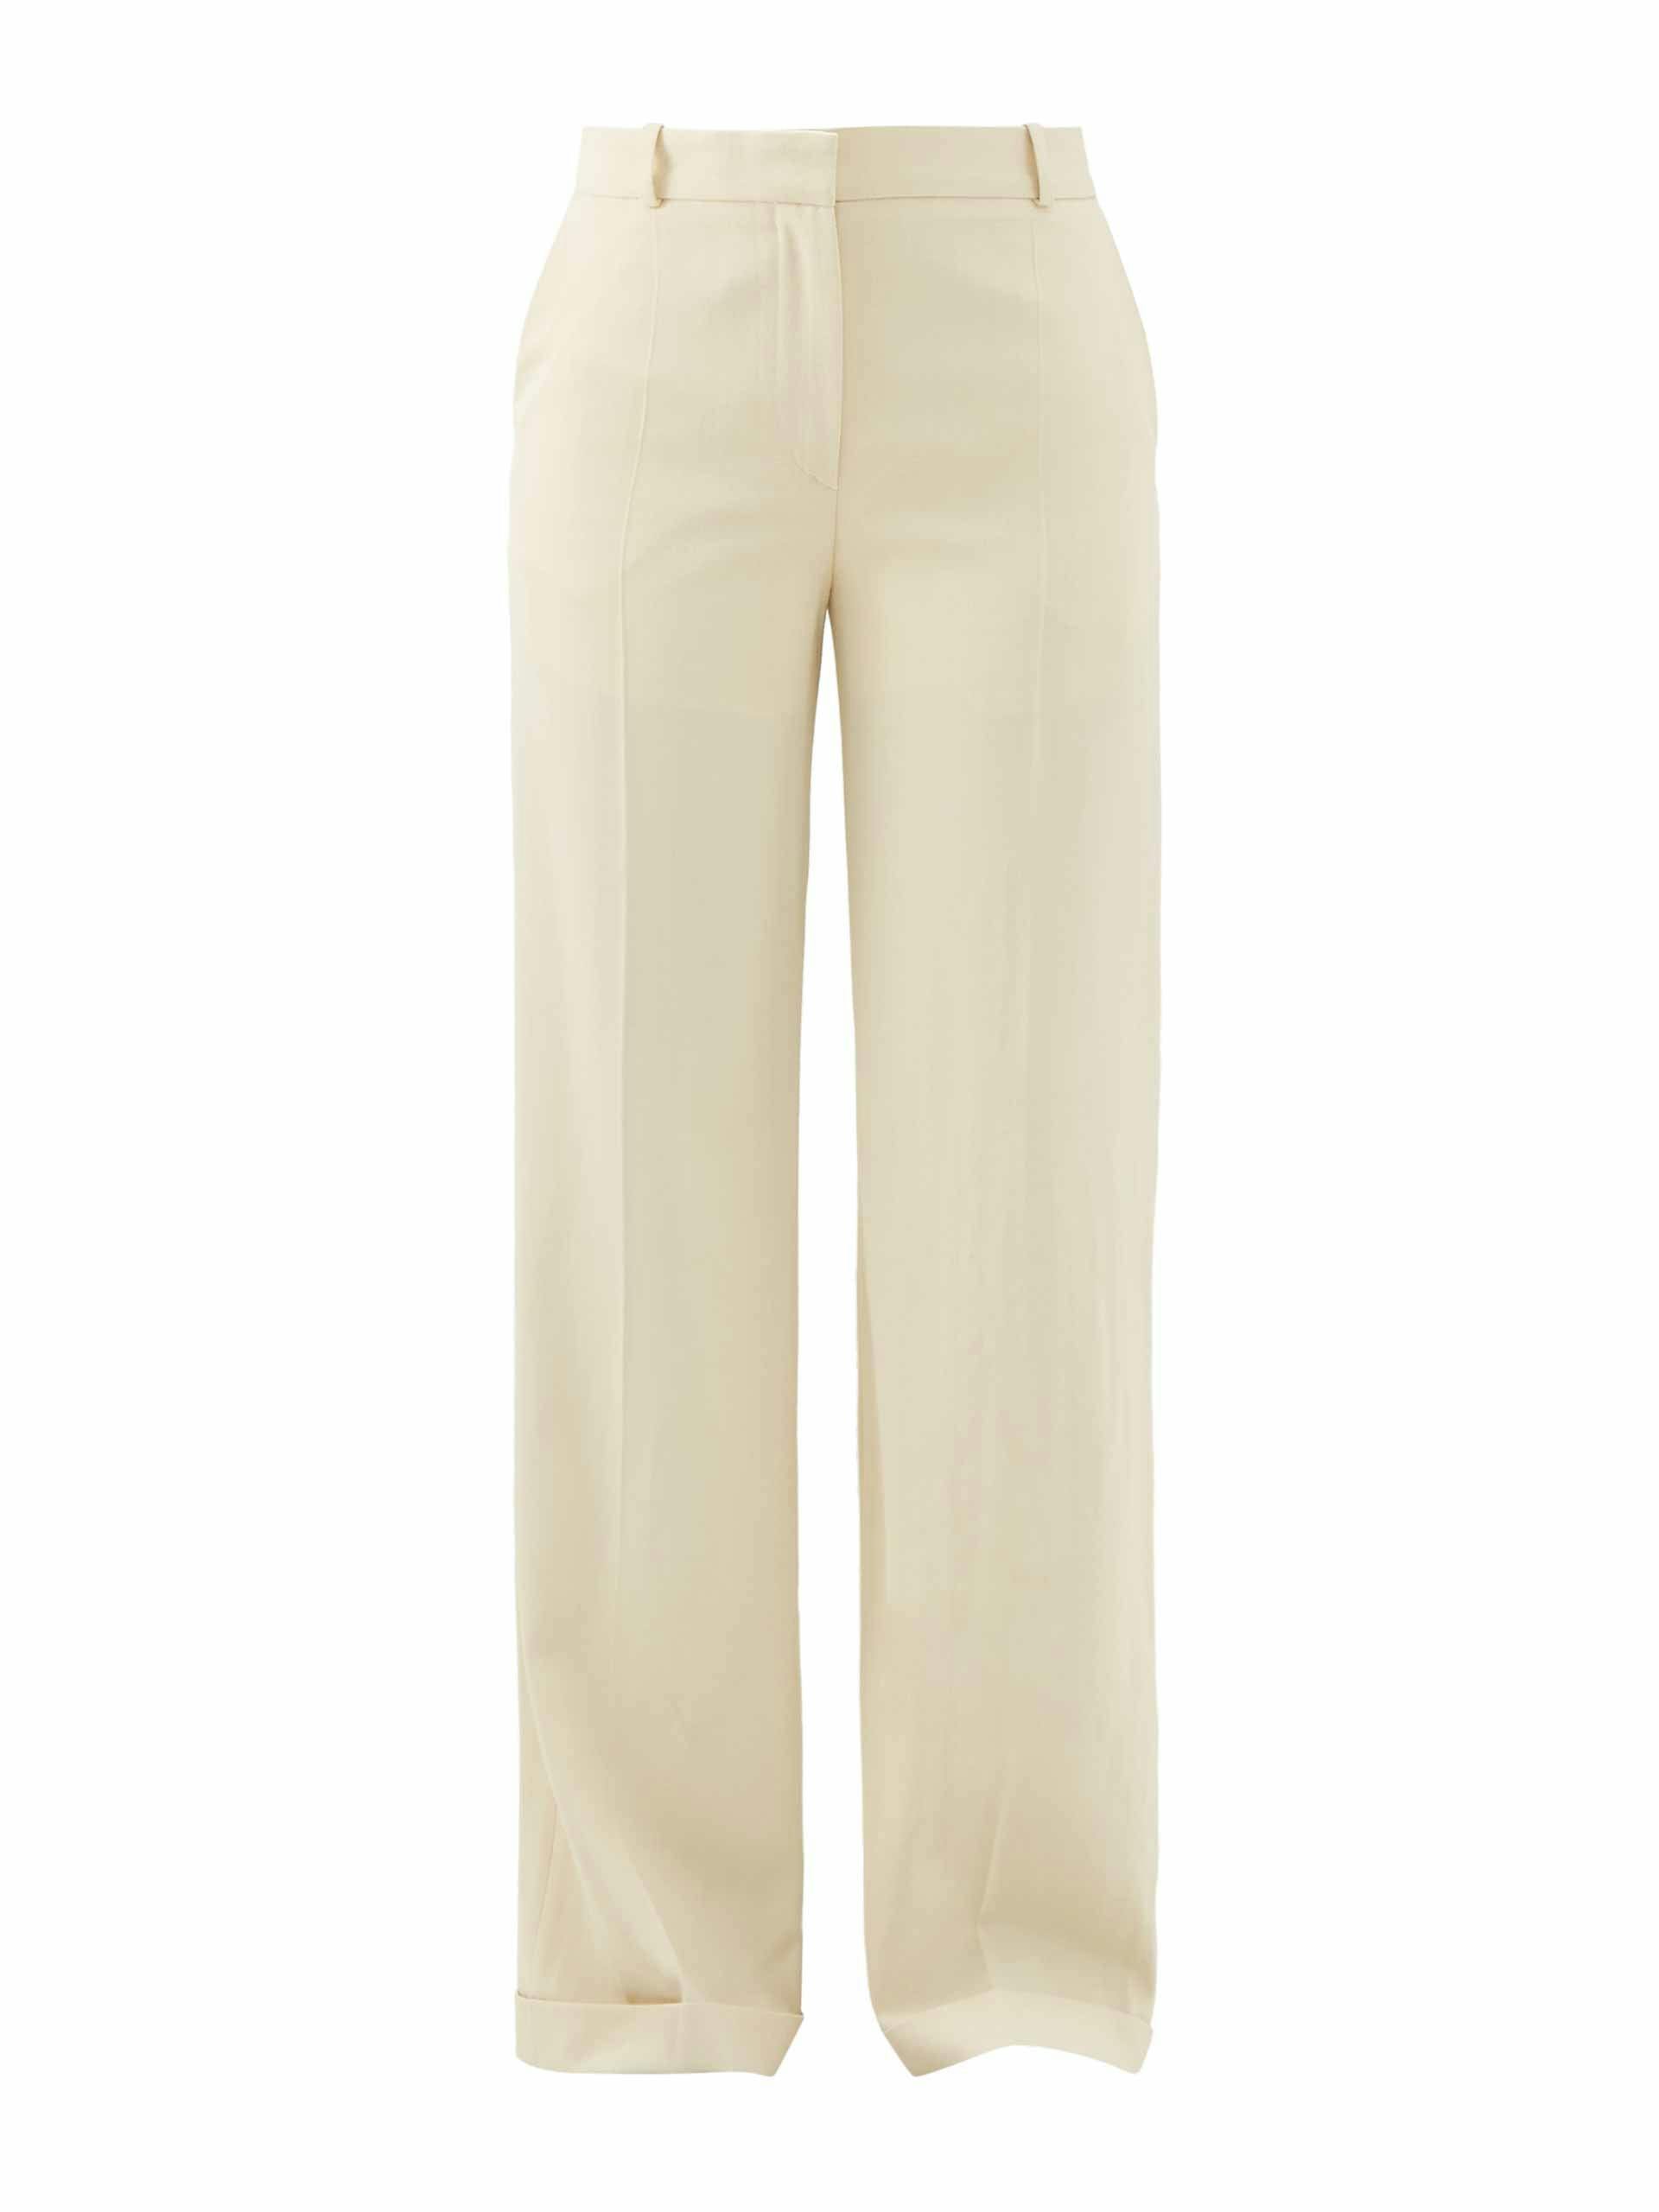 Cream twill suit trousers